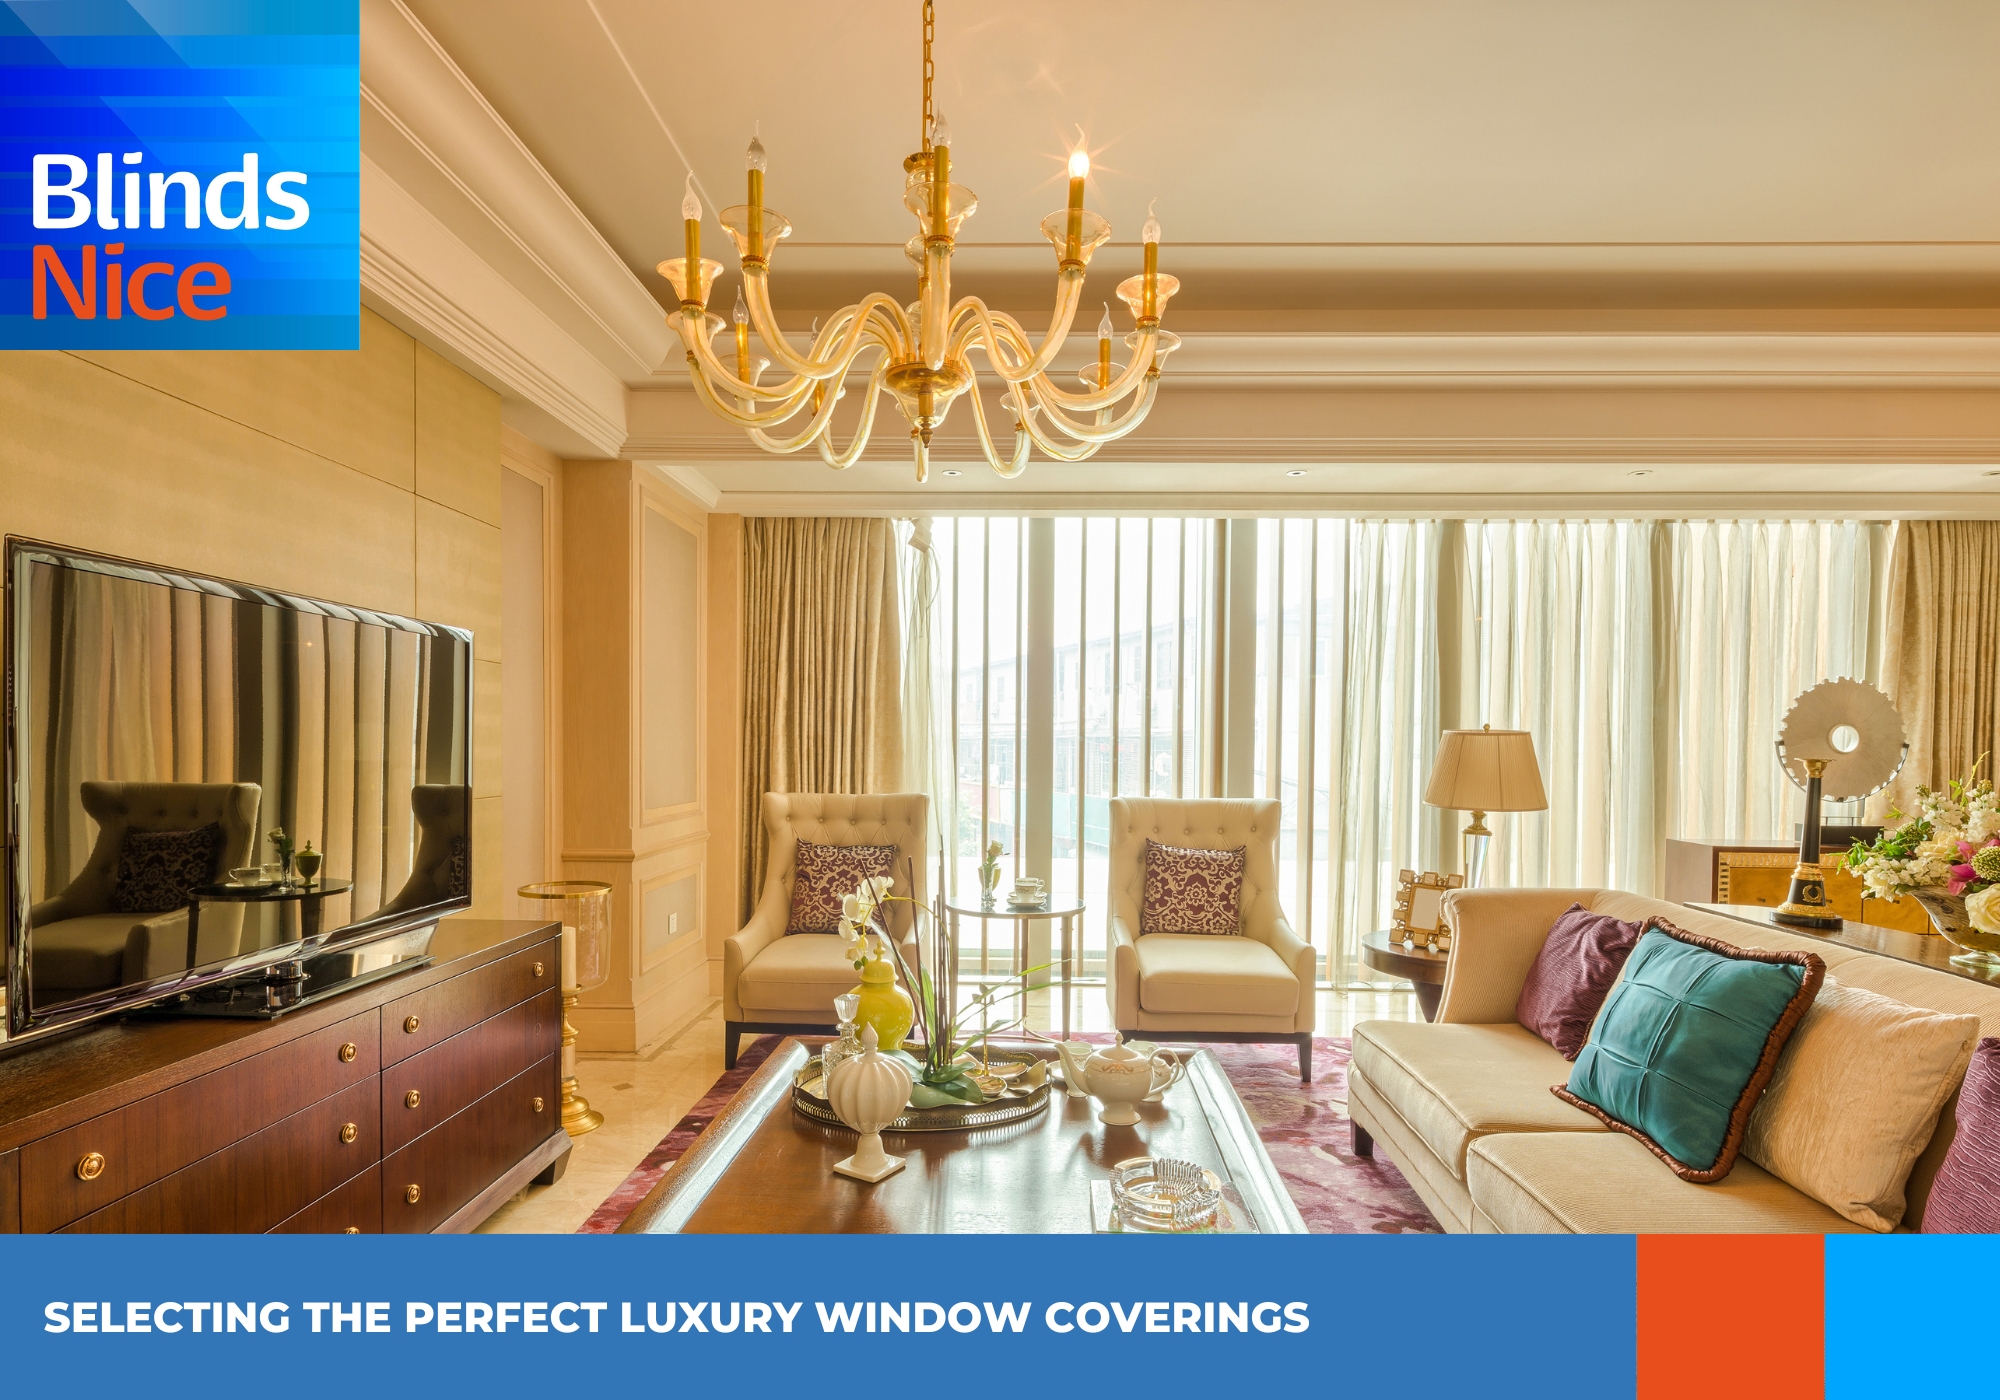 Selecting the perfect luxury window coverings